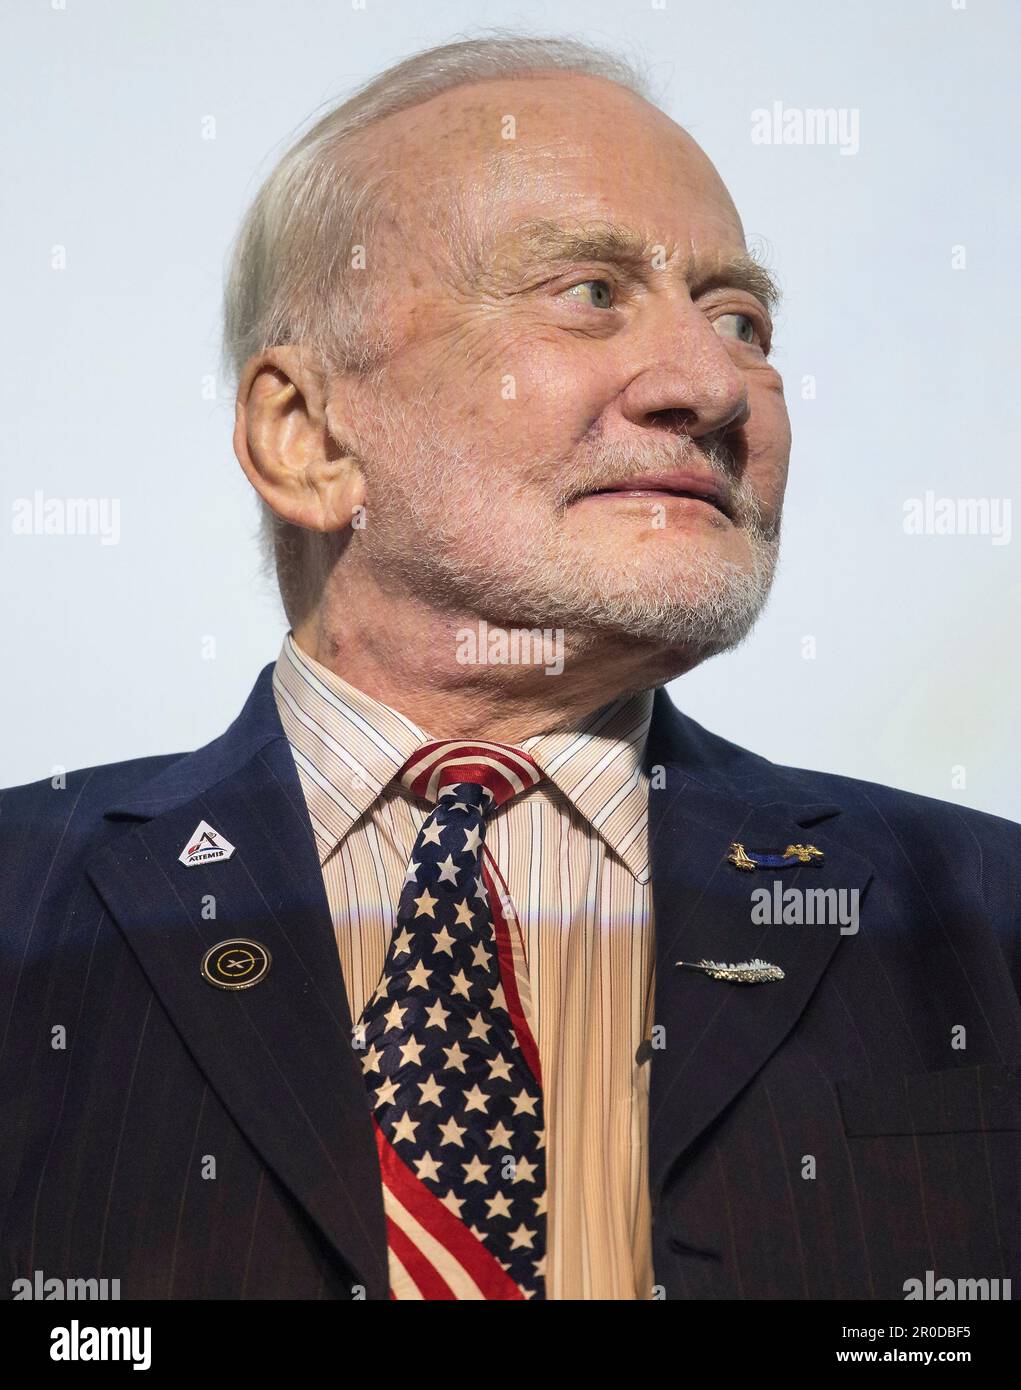 Washington, United States of America. 24 October, 2019. Retired Apollo astronaut Buzz Aldrin during the International Astronautical Federation World Space Award highlight lecture at the 70th International Astronautical Congress at the Washington Convention Center, October 24, 2019 in Washington, D.C. Aldrin was presented the 2019 World Space Award.  Credit: Joel Kowsky/NASA/Alamy Live News Stock Photo